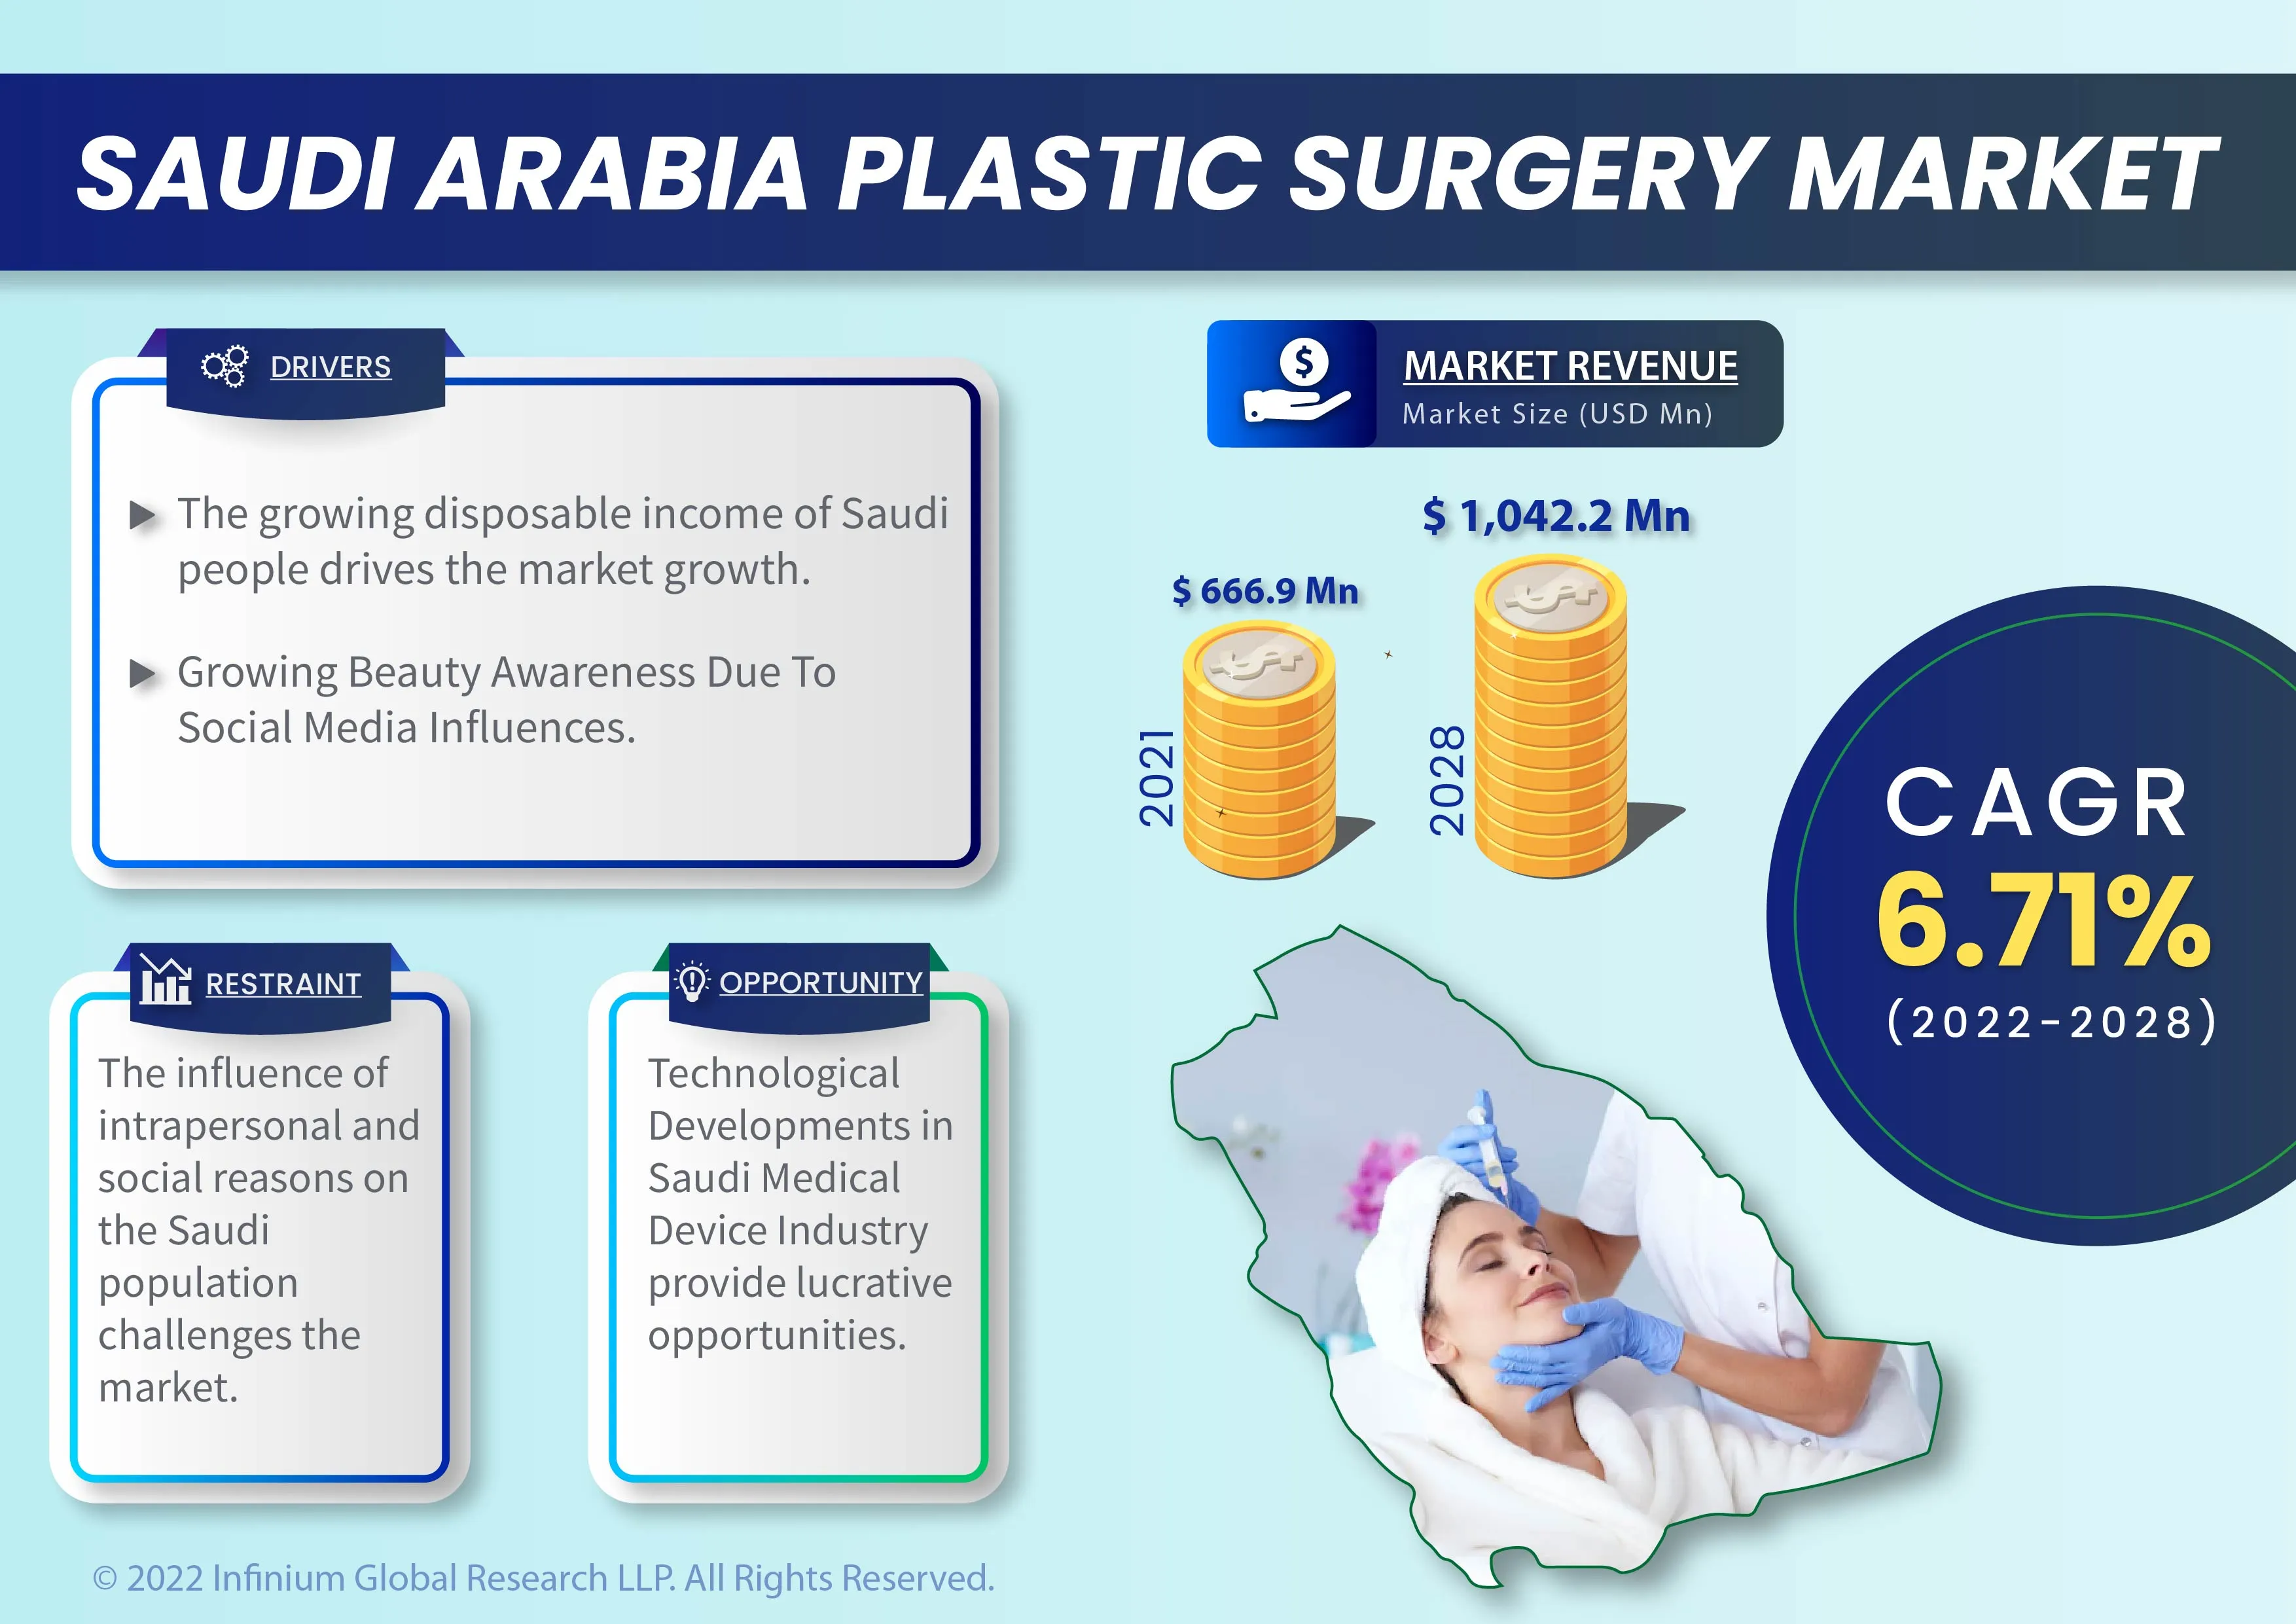 Infograph - Saudi Arabia Plastic Surgery Market Was Valued at USD 666.9 Million in 2021 and